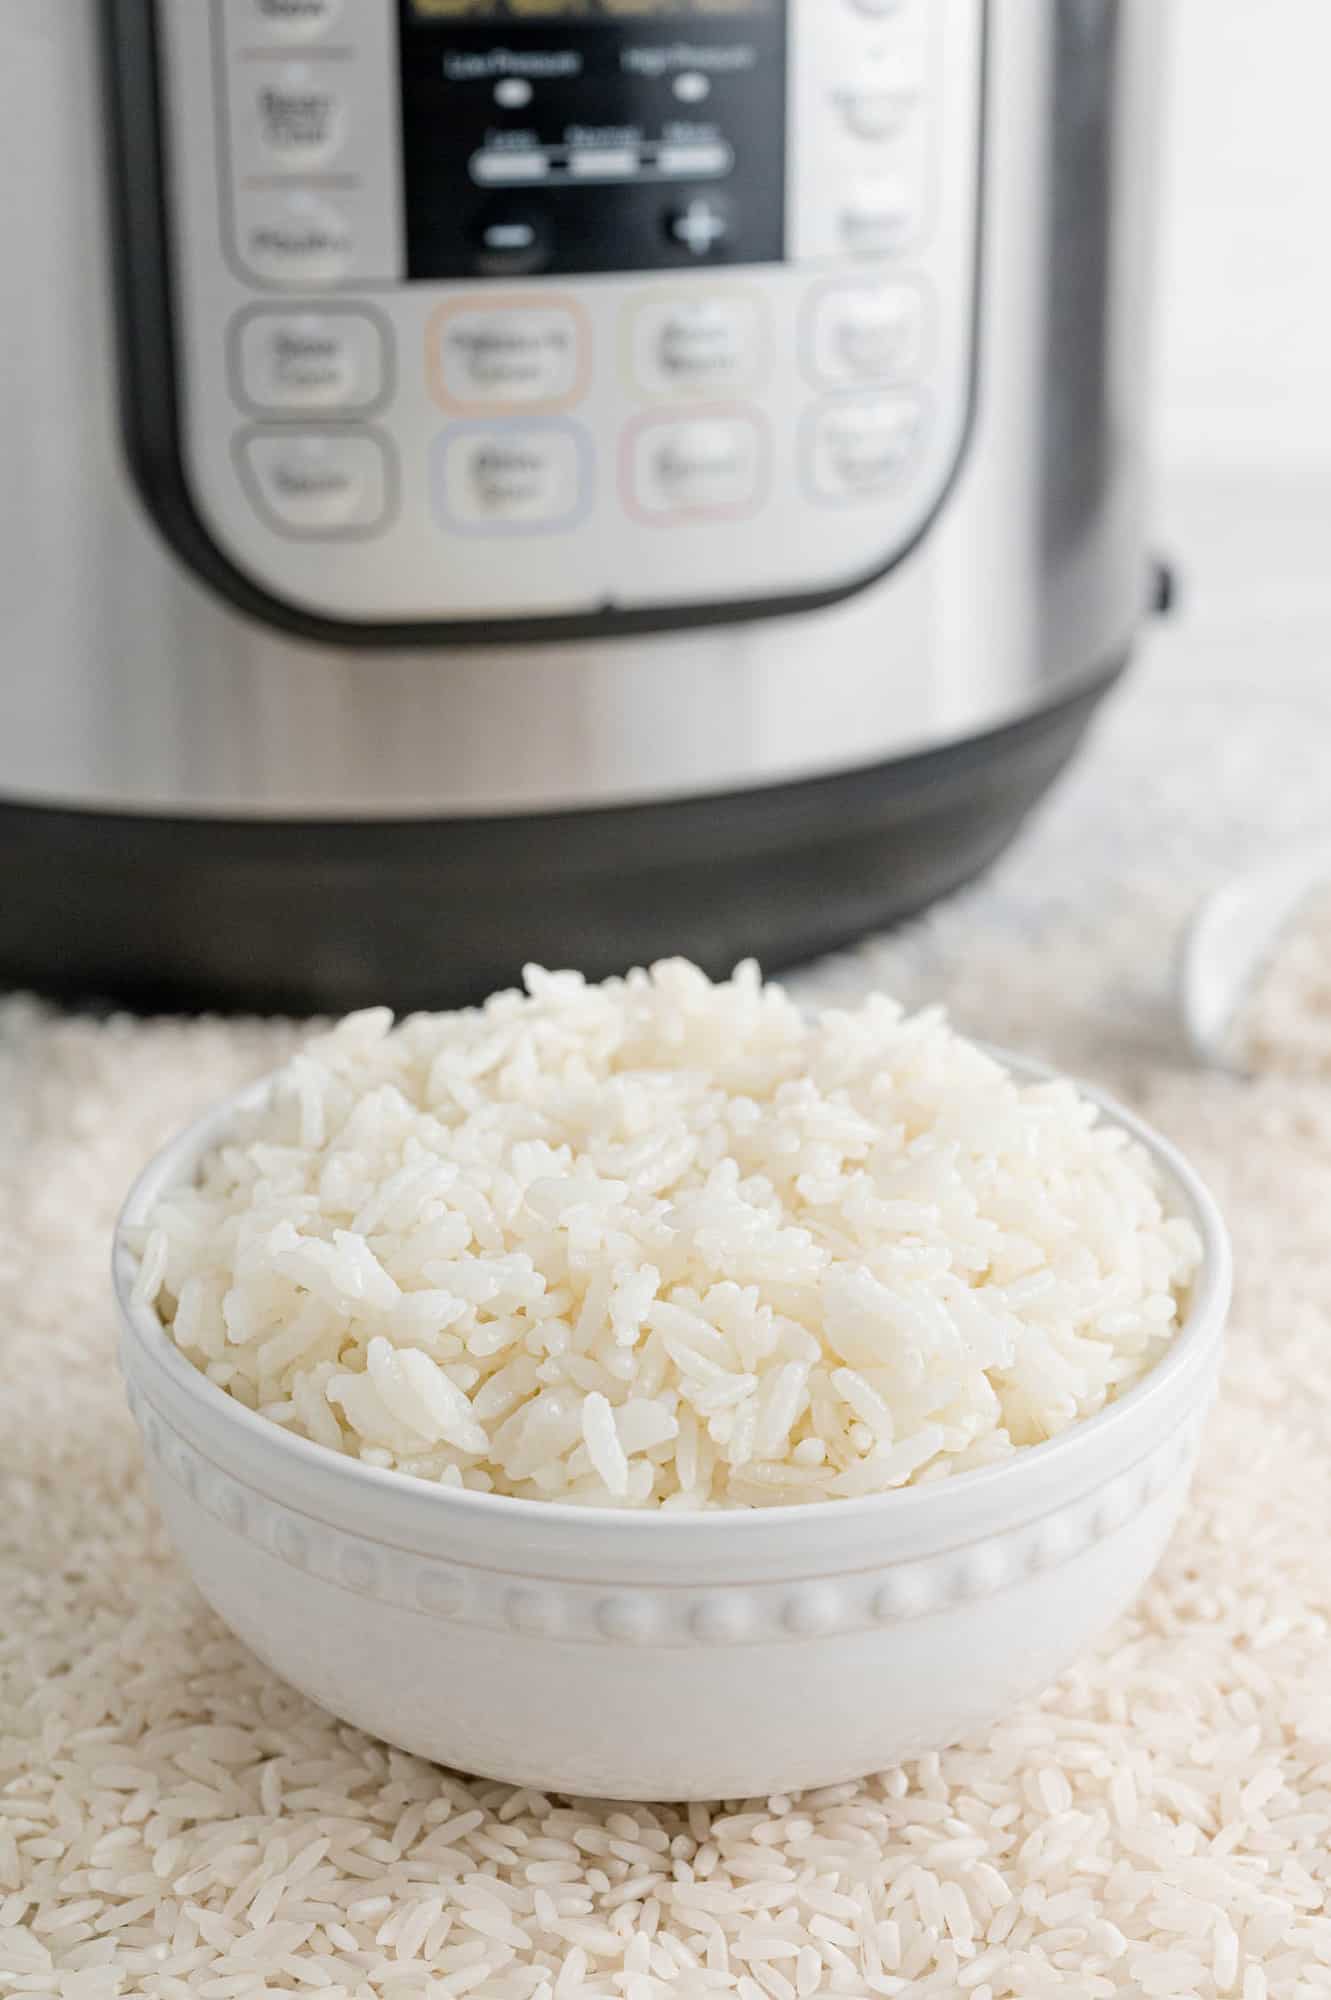 Rice in a bowl in front of a pressure cooker.